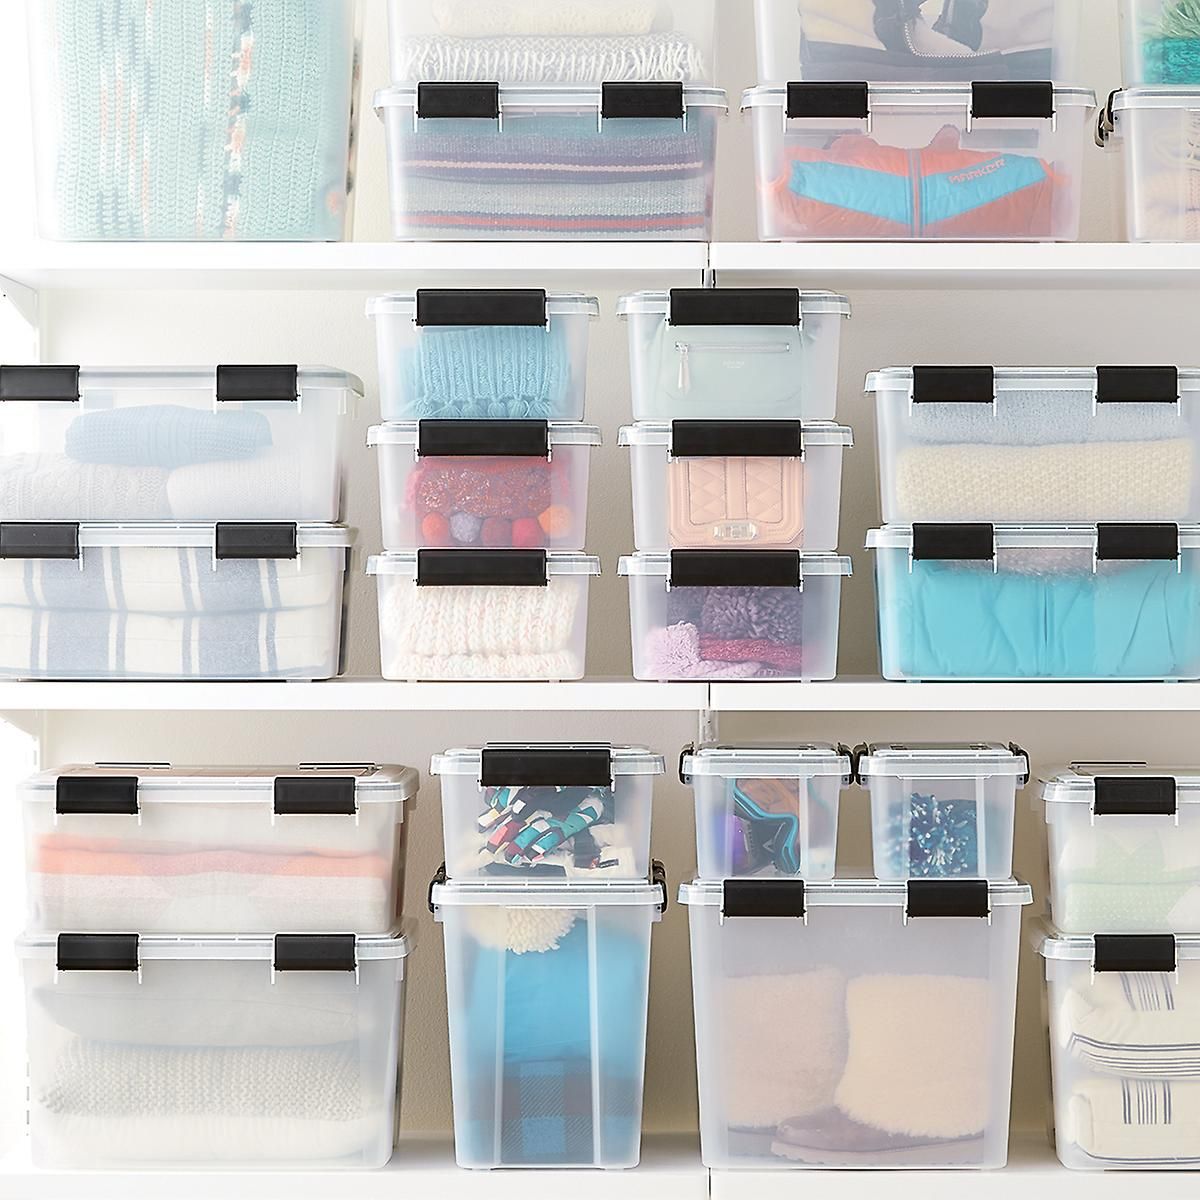 12 Tips for Supremely Organized Basement Storage